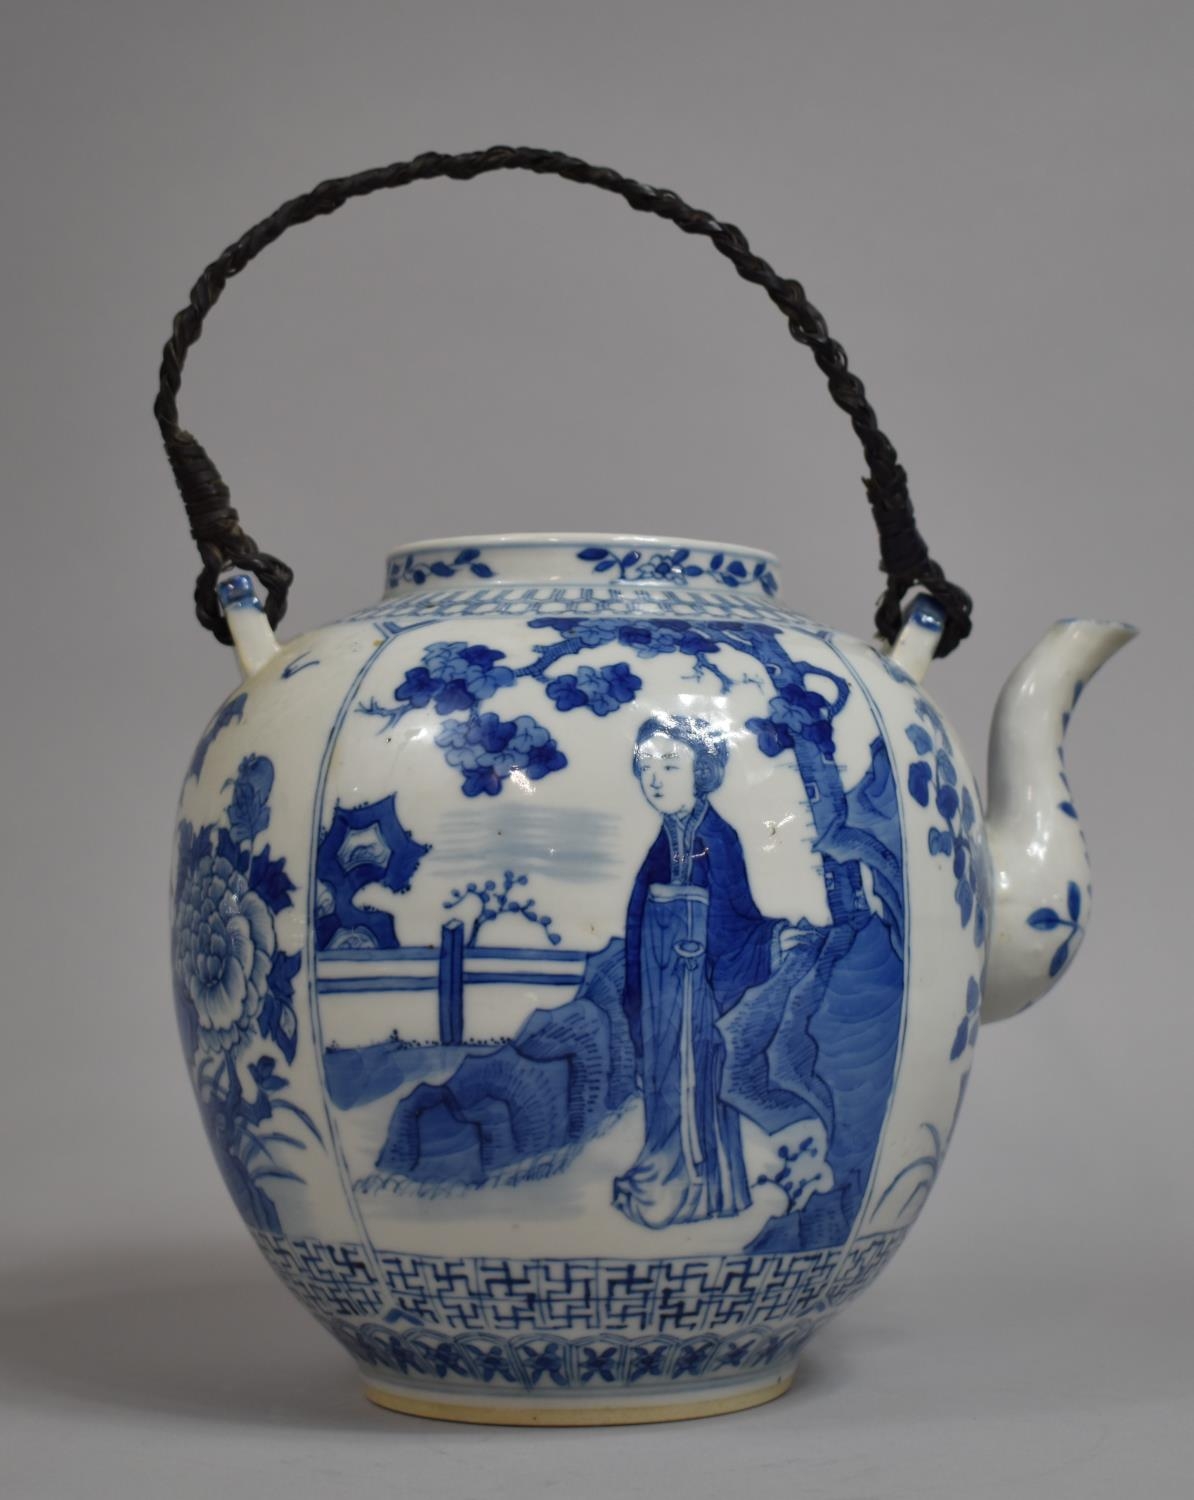 A Large 18th/19th Century Chinese Export Porcelain Teapot of Bellied Form Decorated with Family